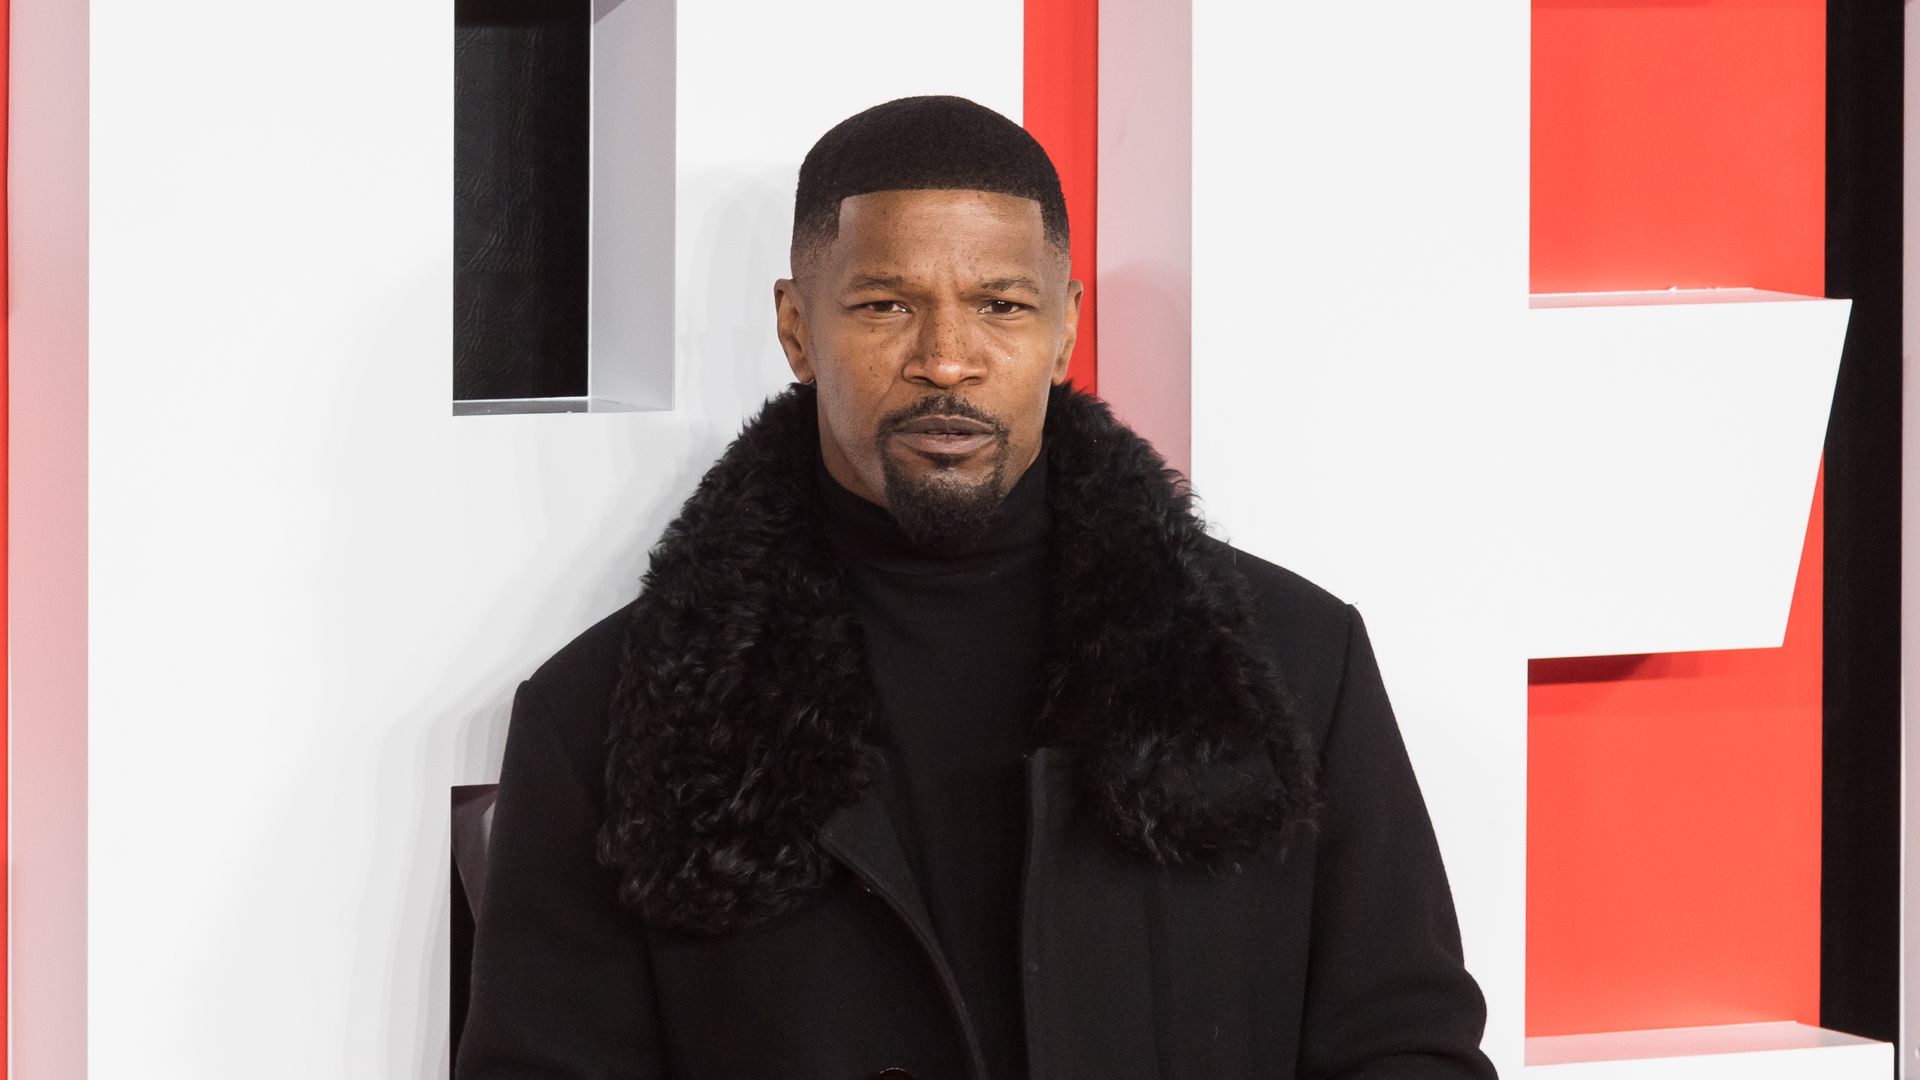 LONDON, UNITED KINGDOM - FEBRUARY 15, 2023: Jamie Foxx attends the European Premiere of Creed III at Cineworld Leicester Square in London, United Kingdom on February 15, 2023. (Photo credit should read Wiktor Szymanowicz/Future Publishing via Getty Images